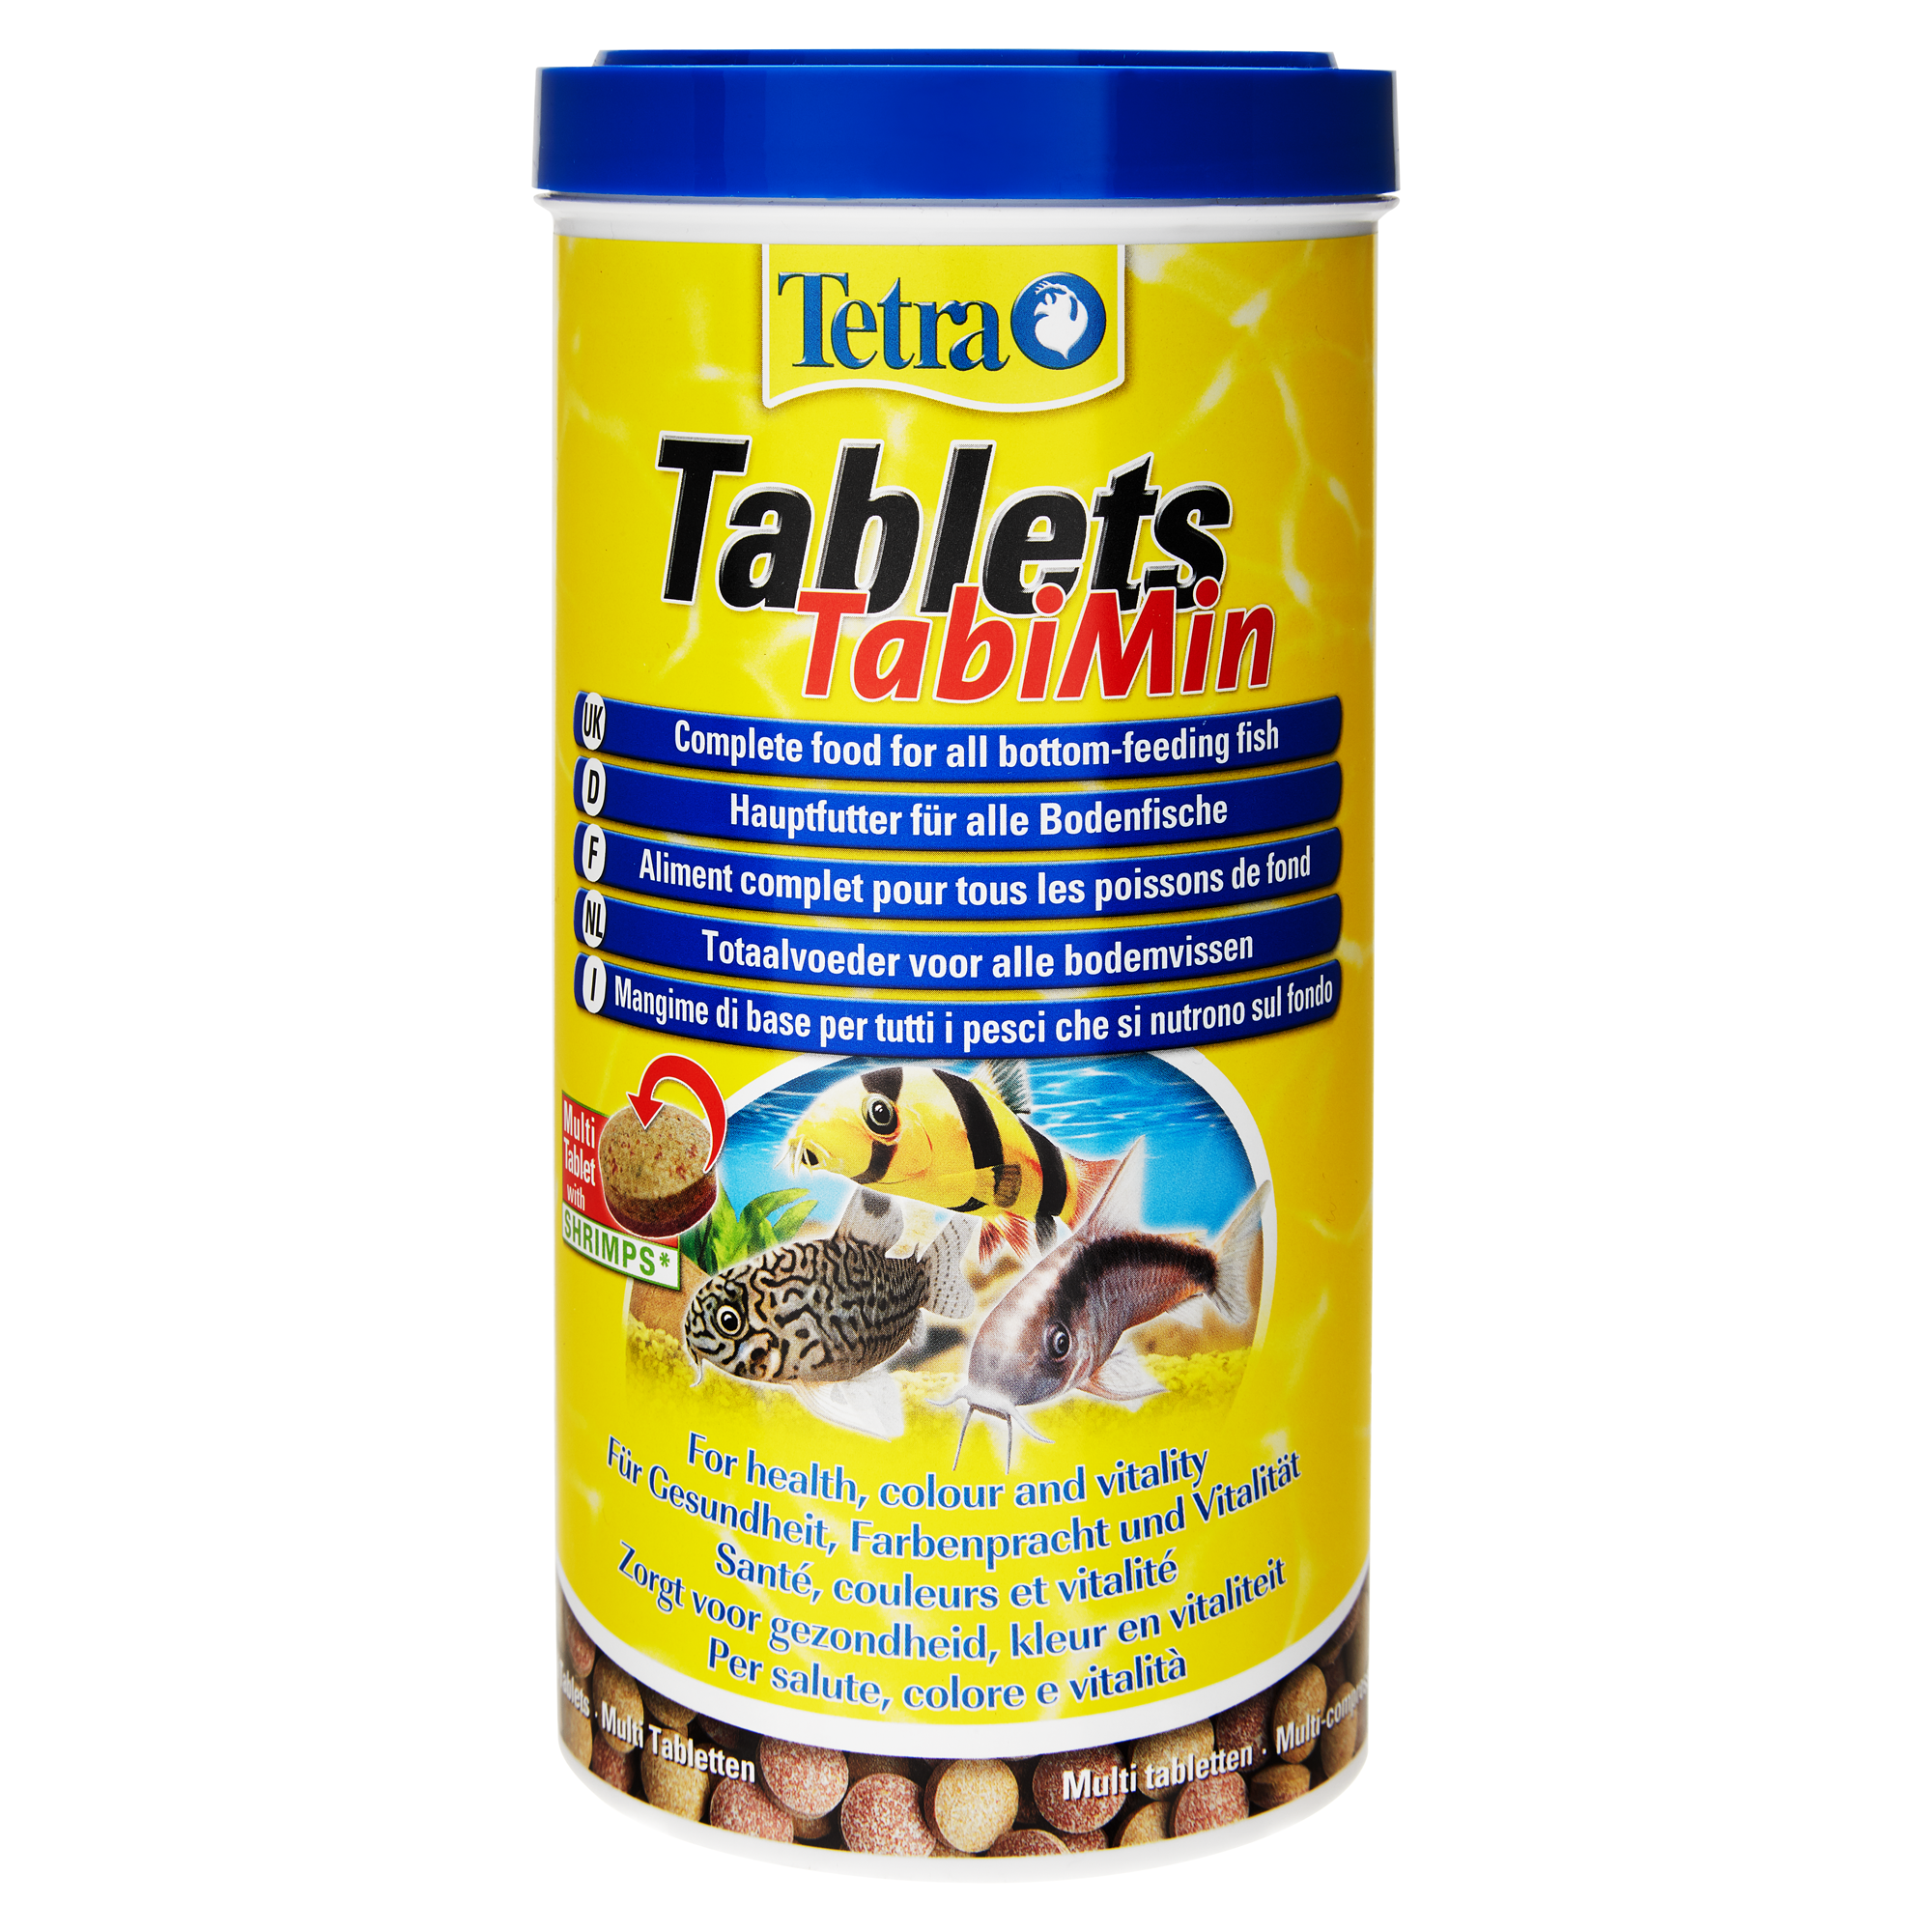 Fischfutter Tablets TabiMin 620 g + product picture